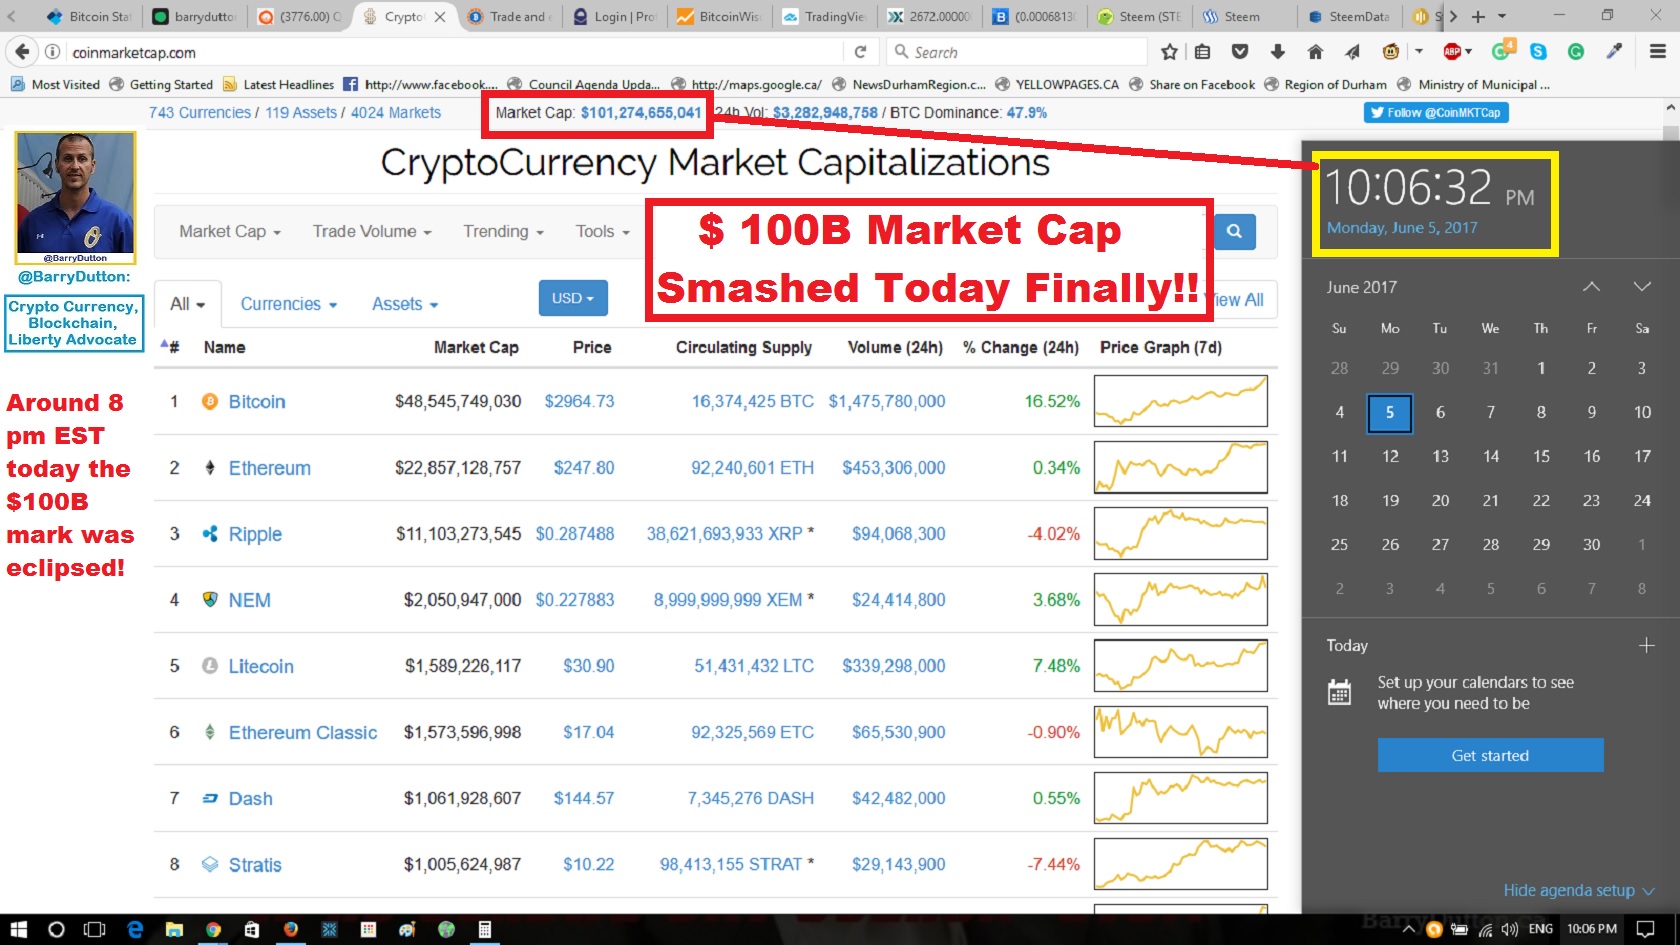 100B market cap achieved 8 pm or so today in Crypto - June 5 - 2017.jpg